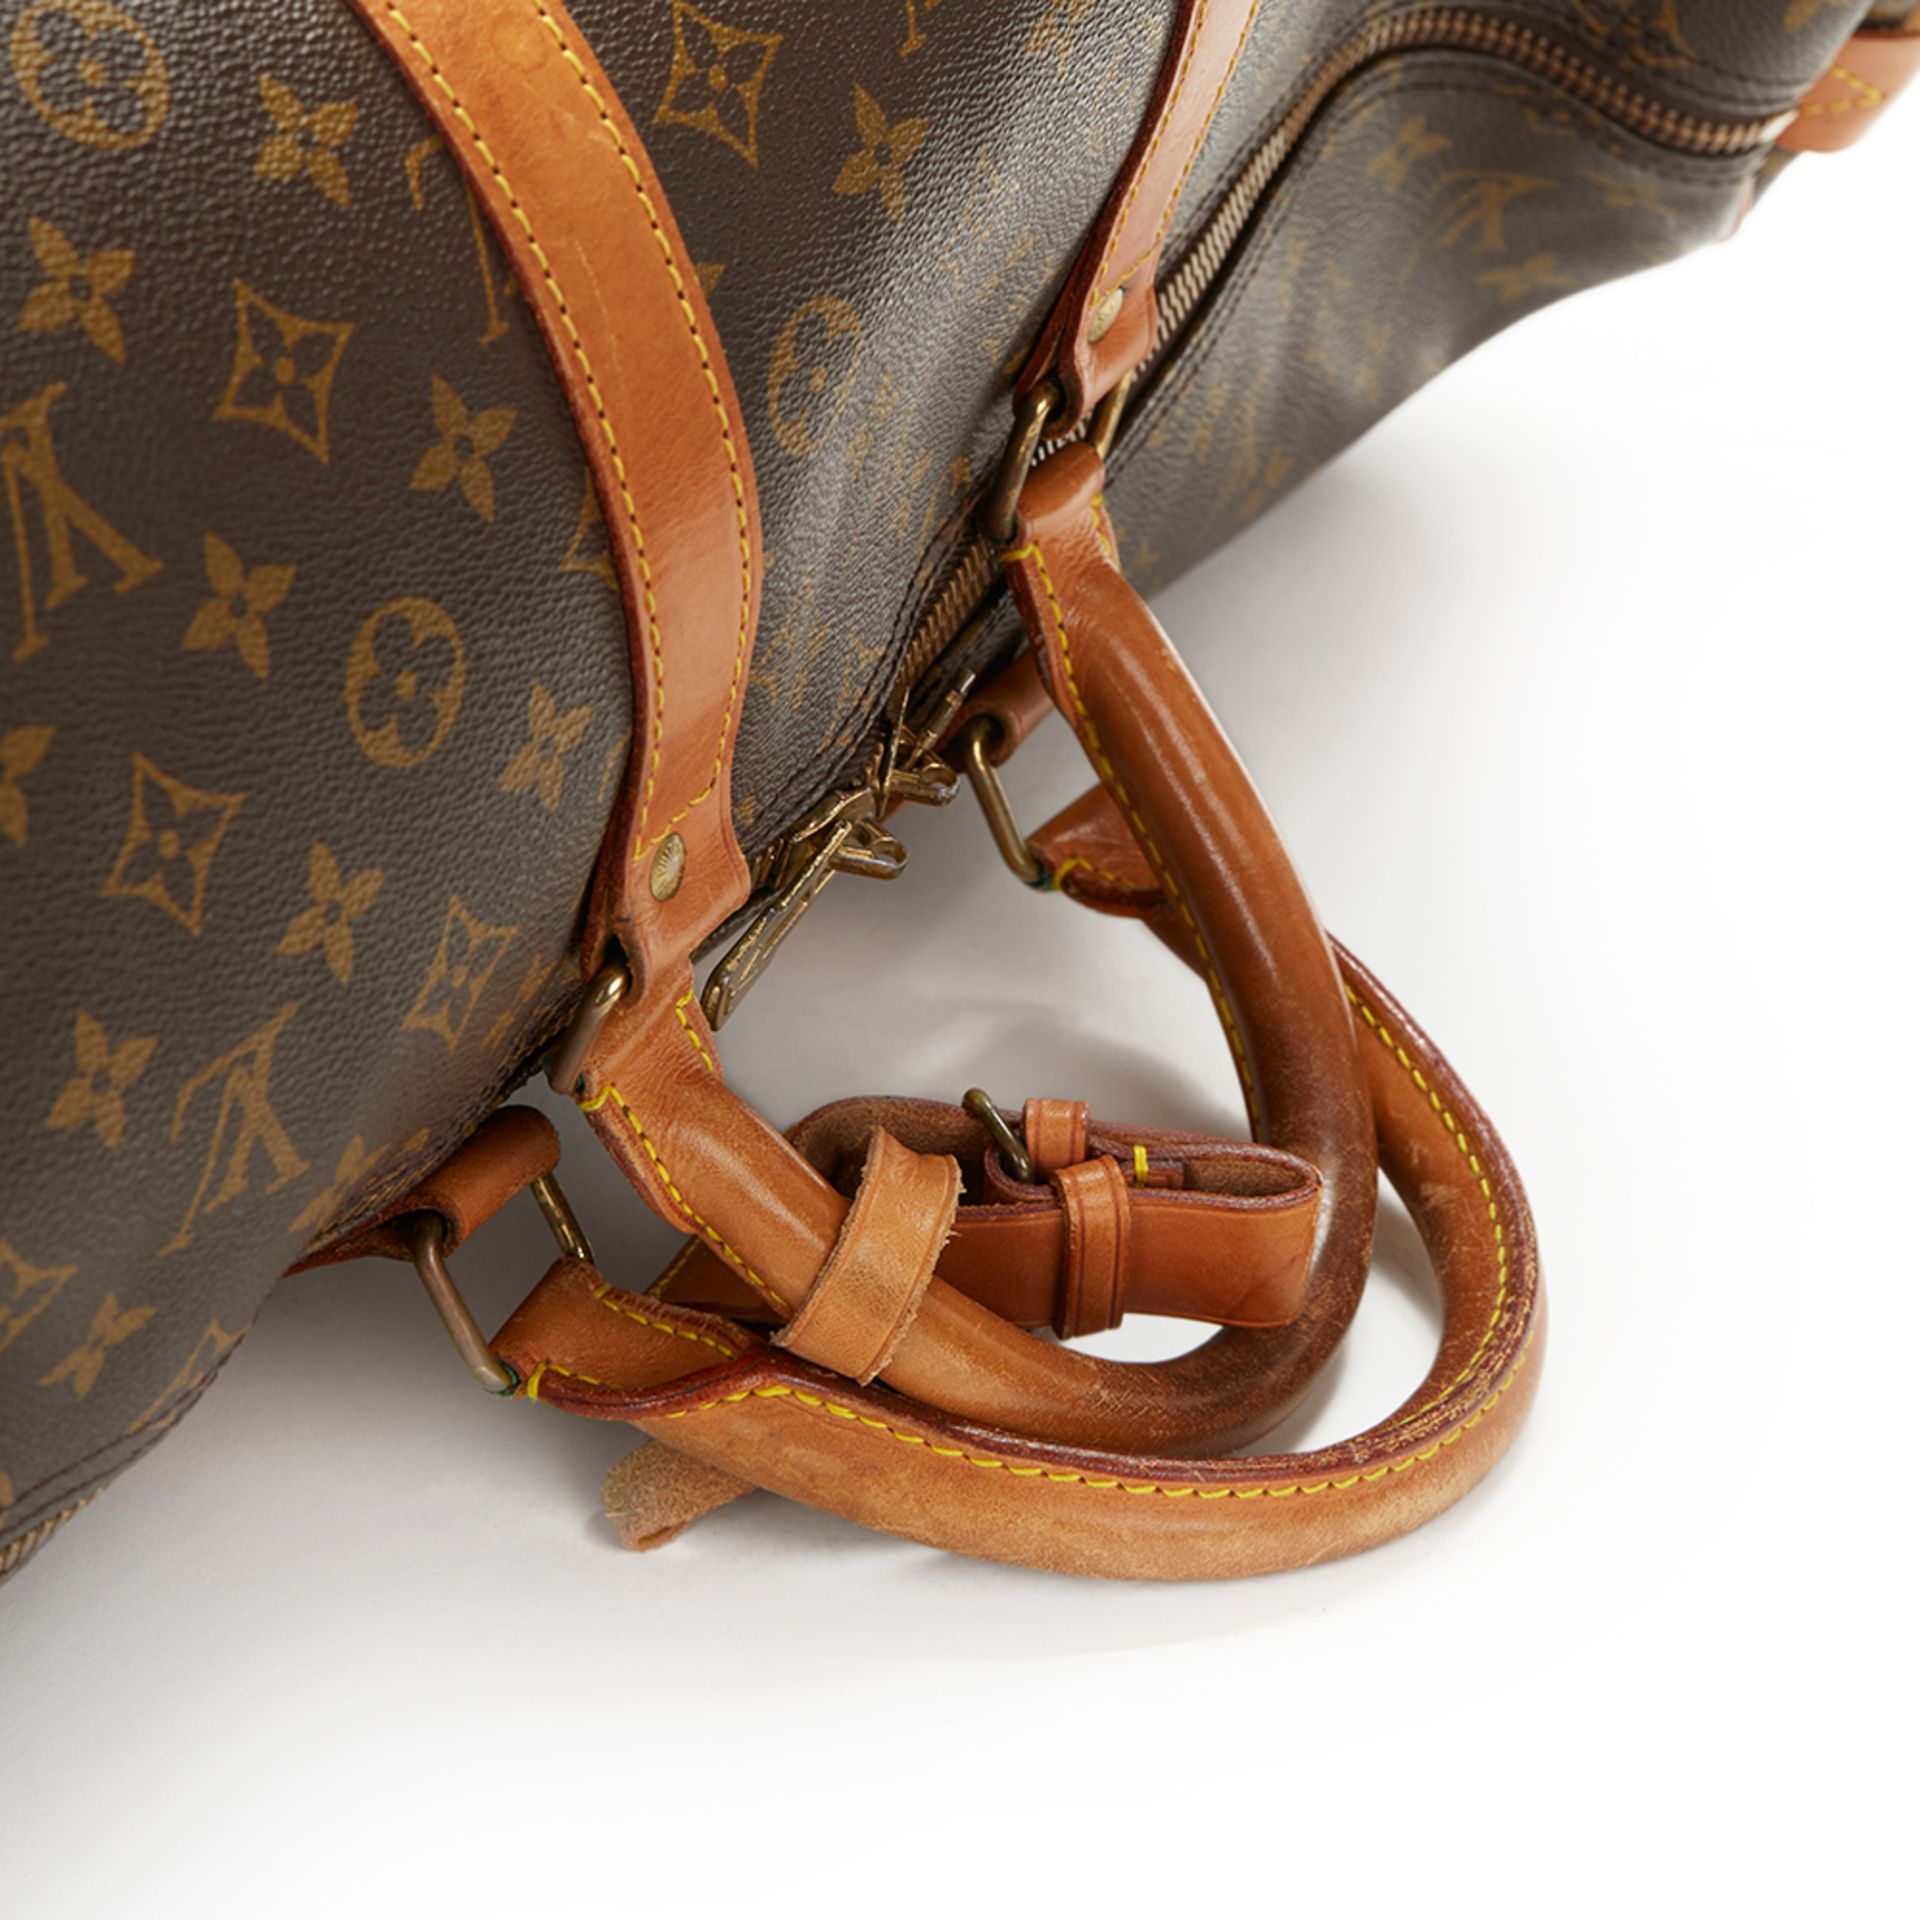 Louis Vuitton Keepall 55 - Image 10 of 12